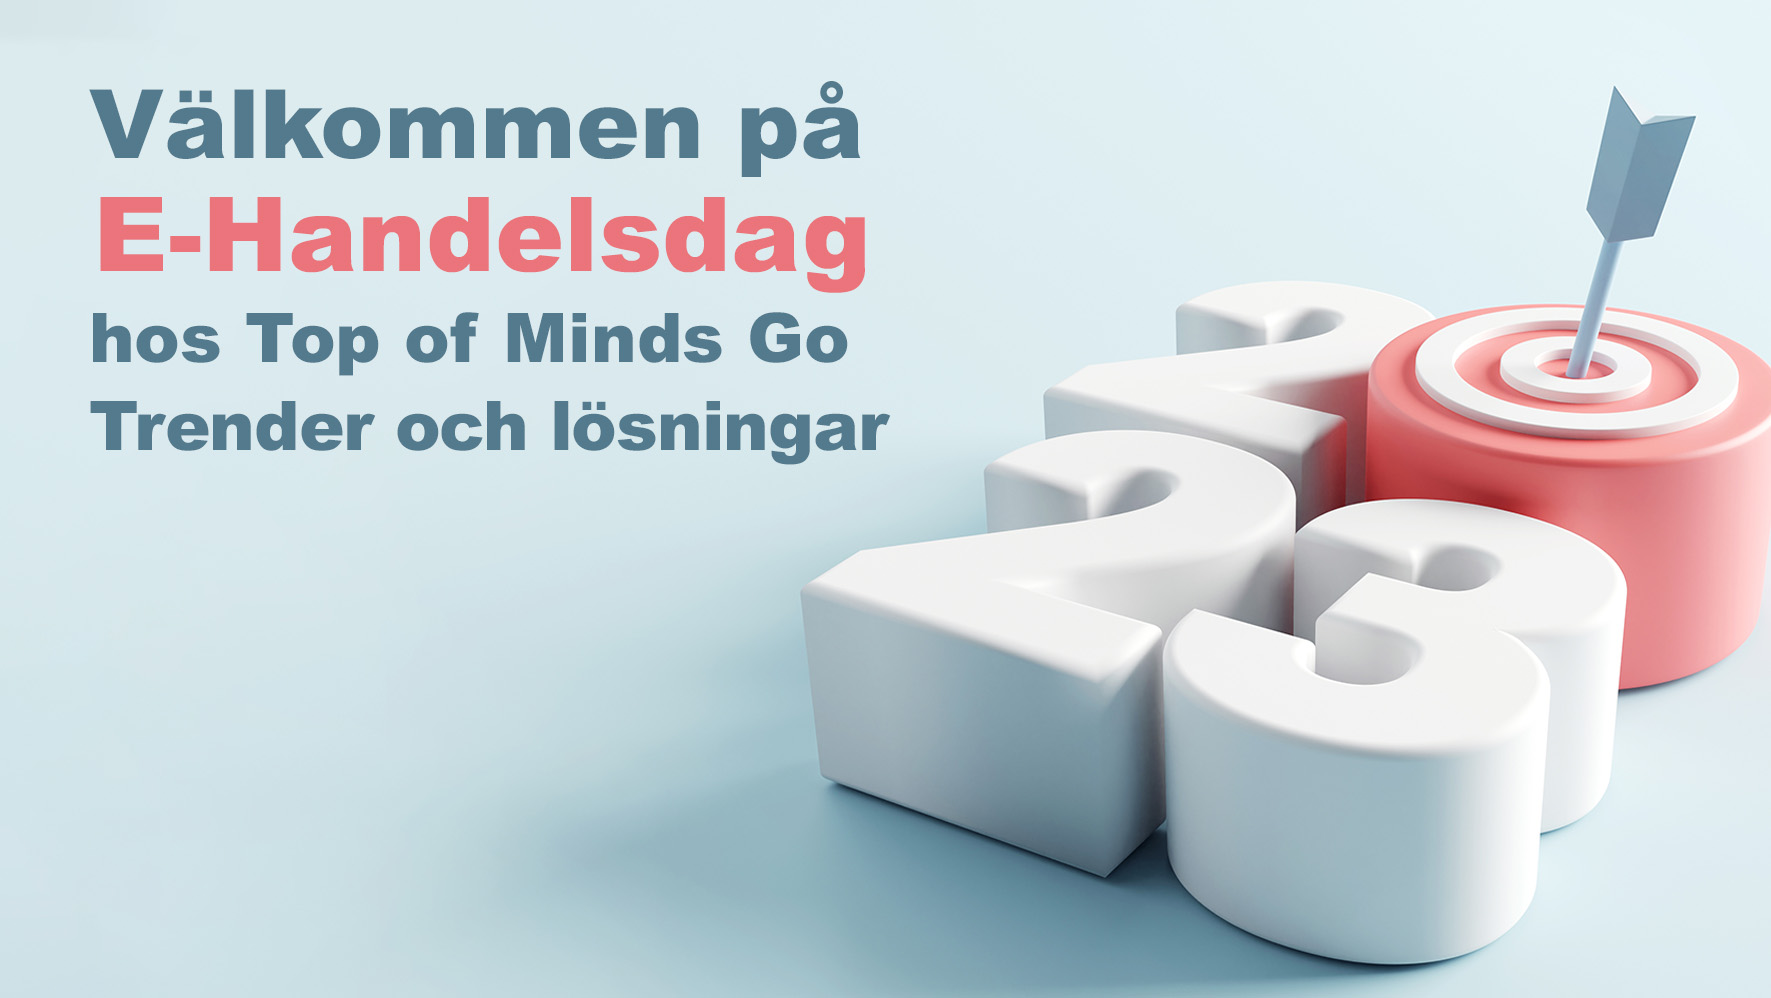 Join Intershop at Top of Minds E-Commerce Day in Stockholm